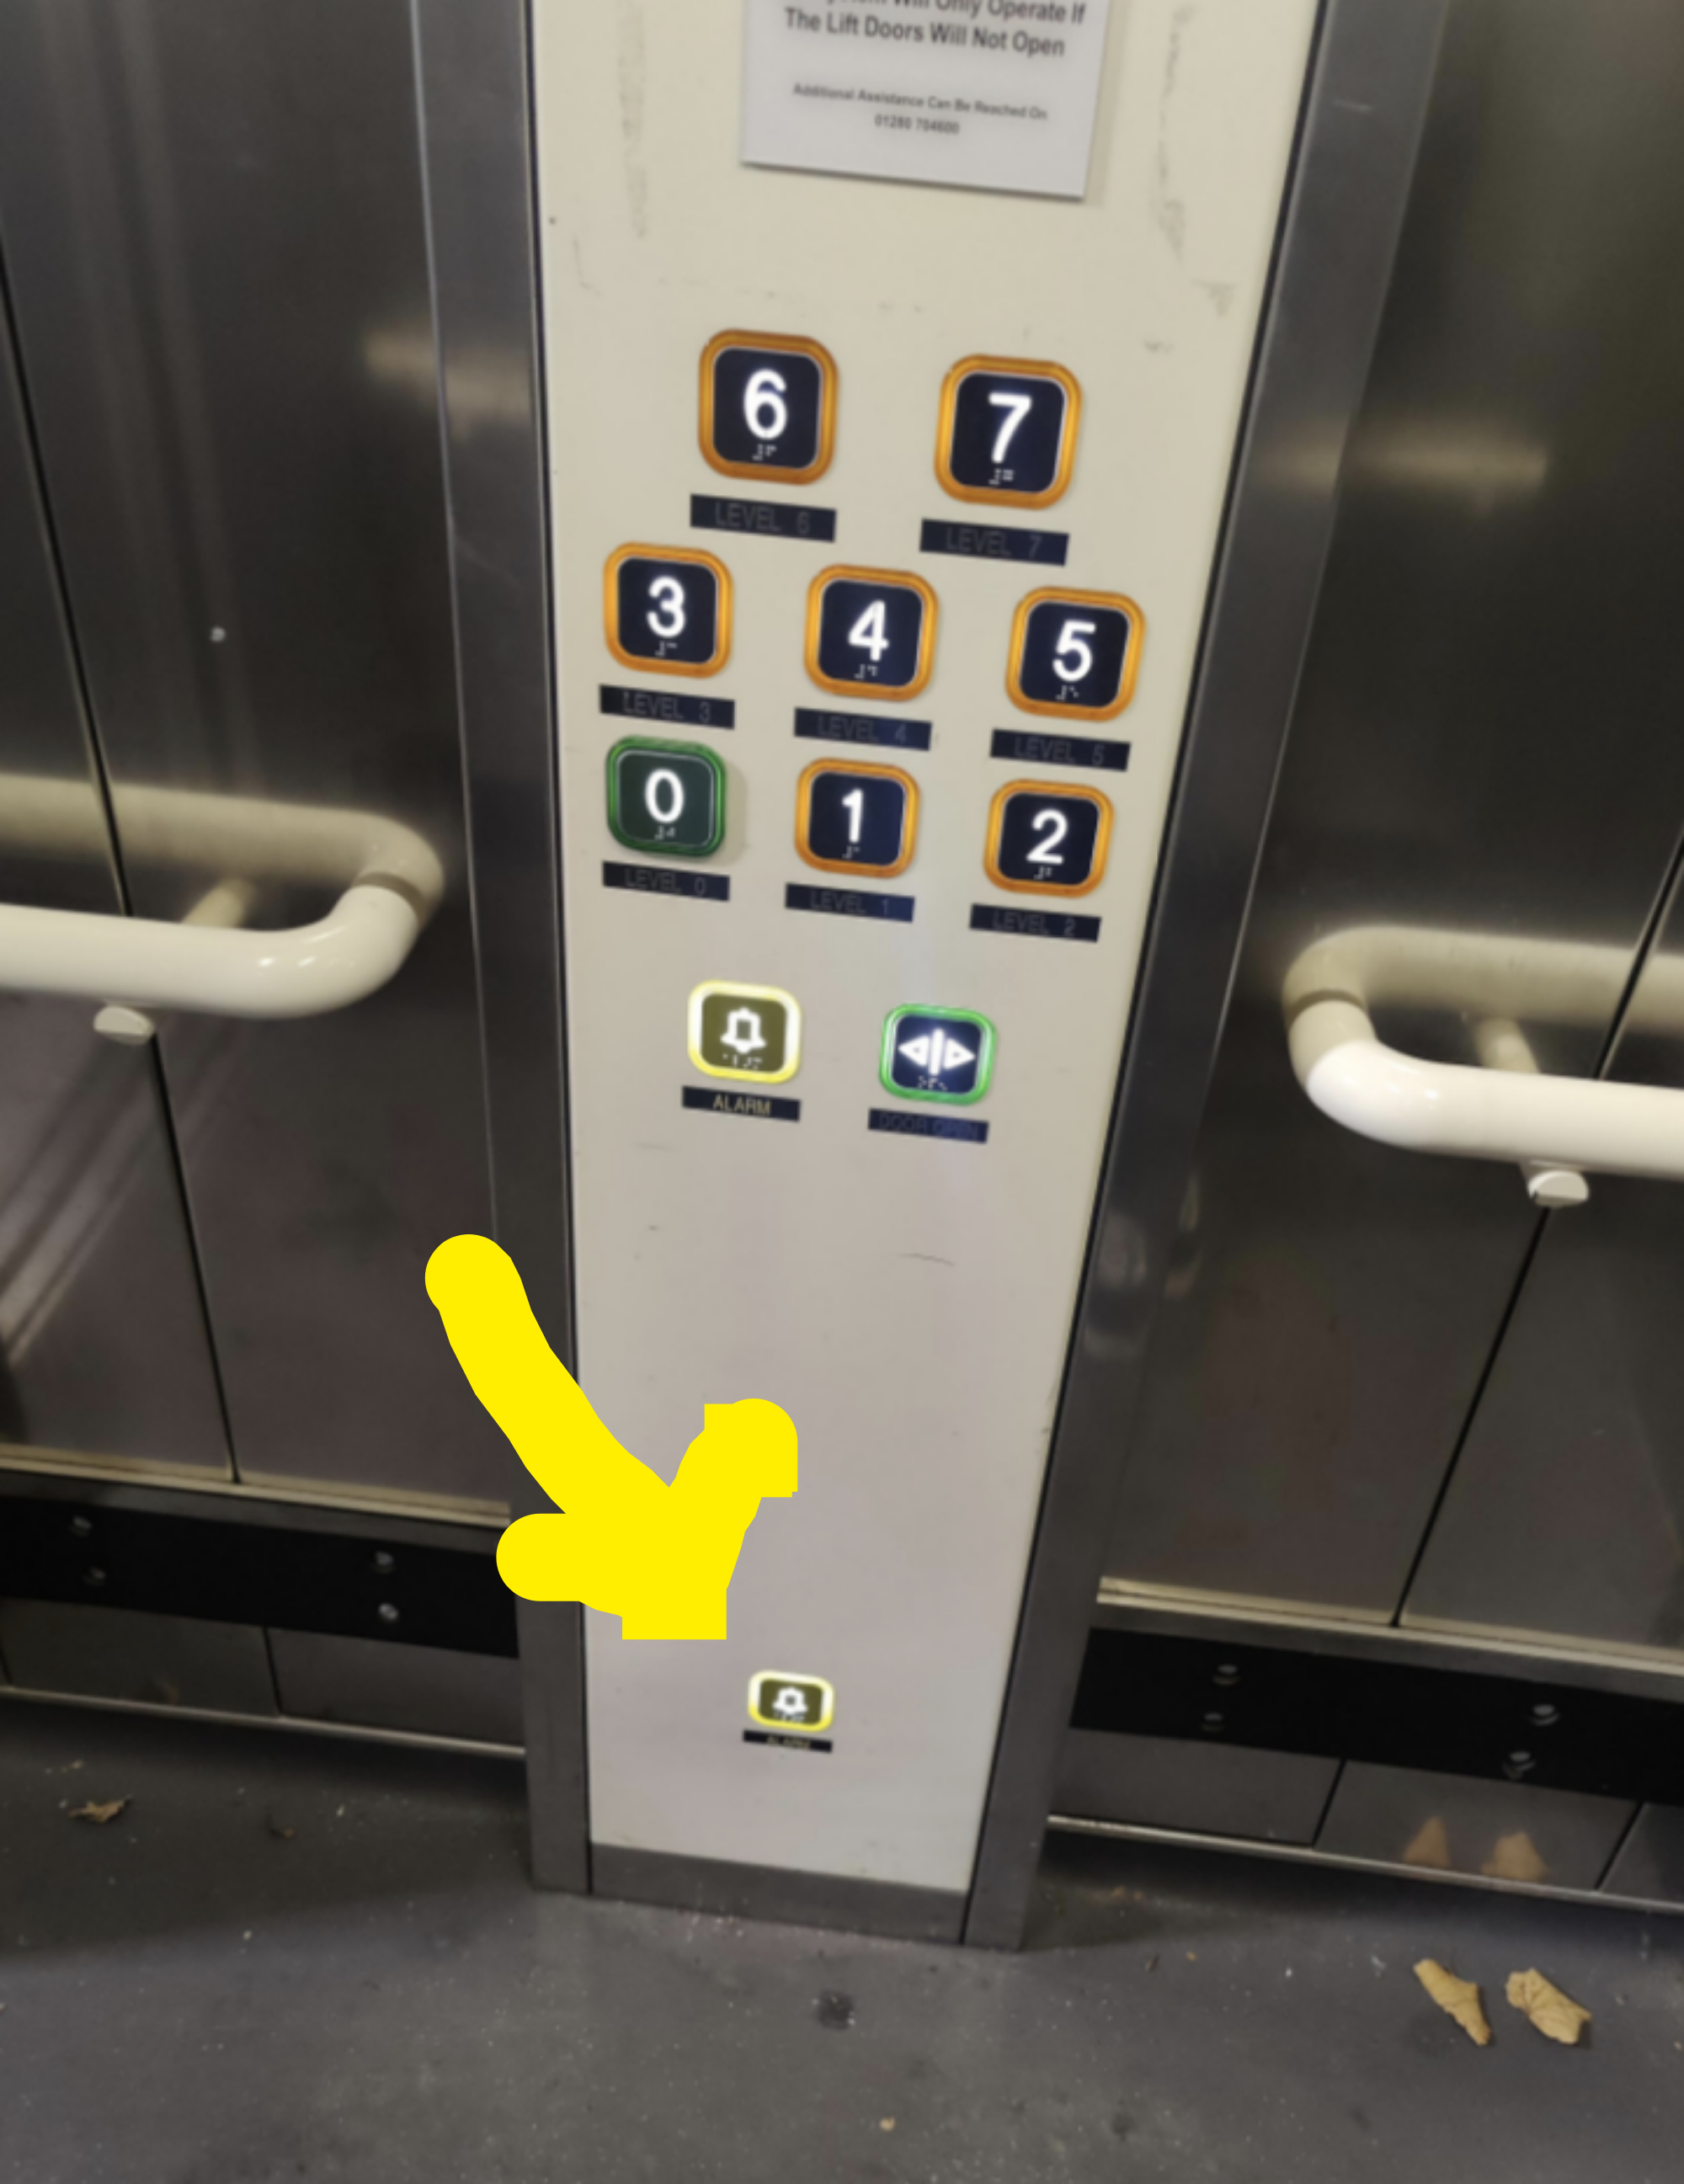 There&#x27;s one emergency button next to the floor numbers, but a second emergency button located at the very bottom, so it can be pressed from the floor